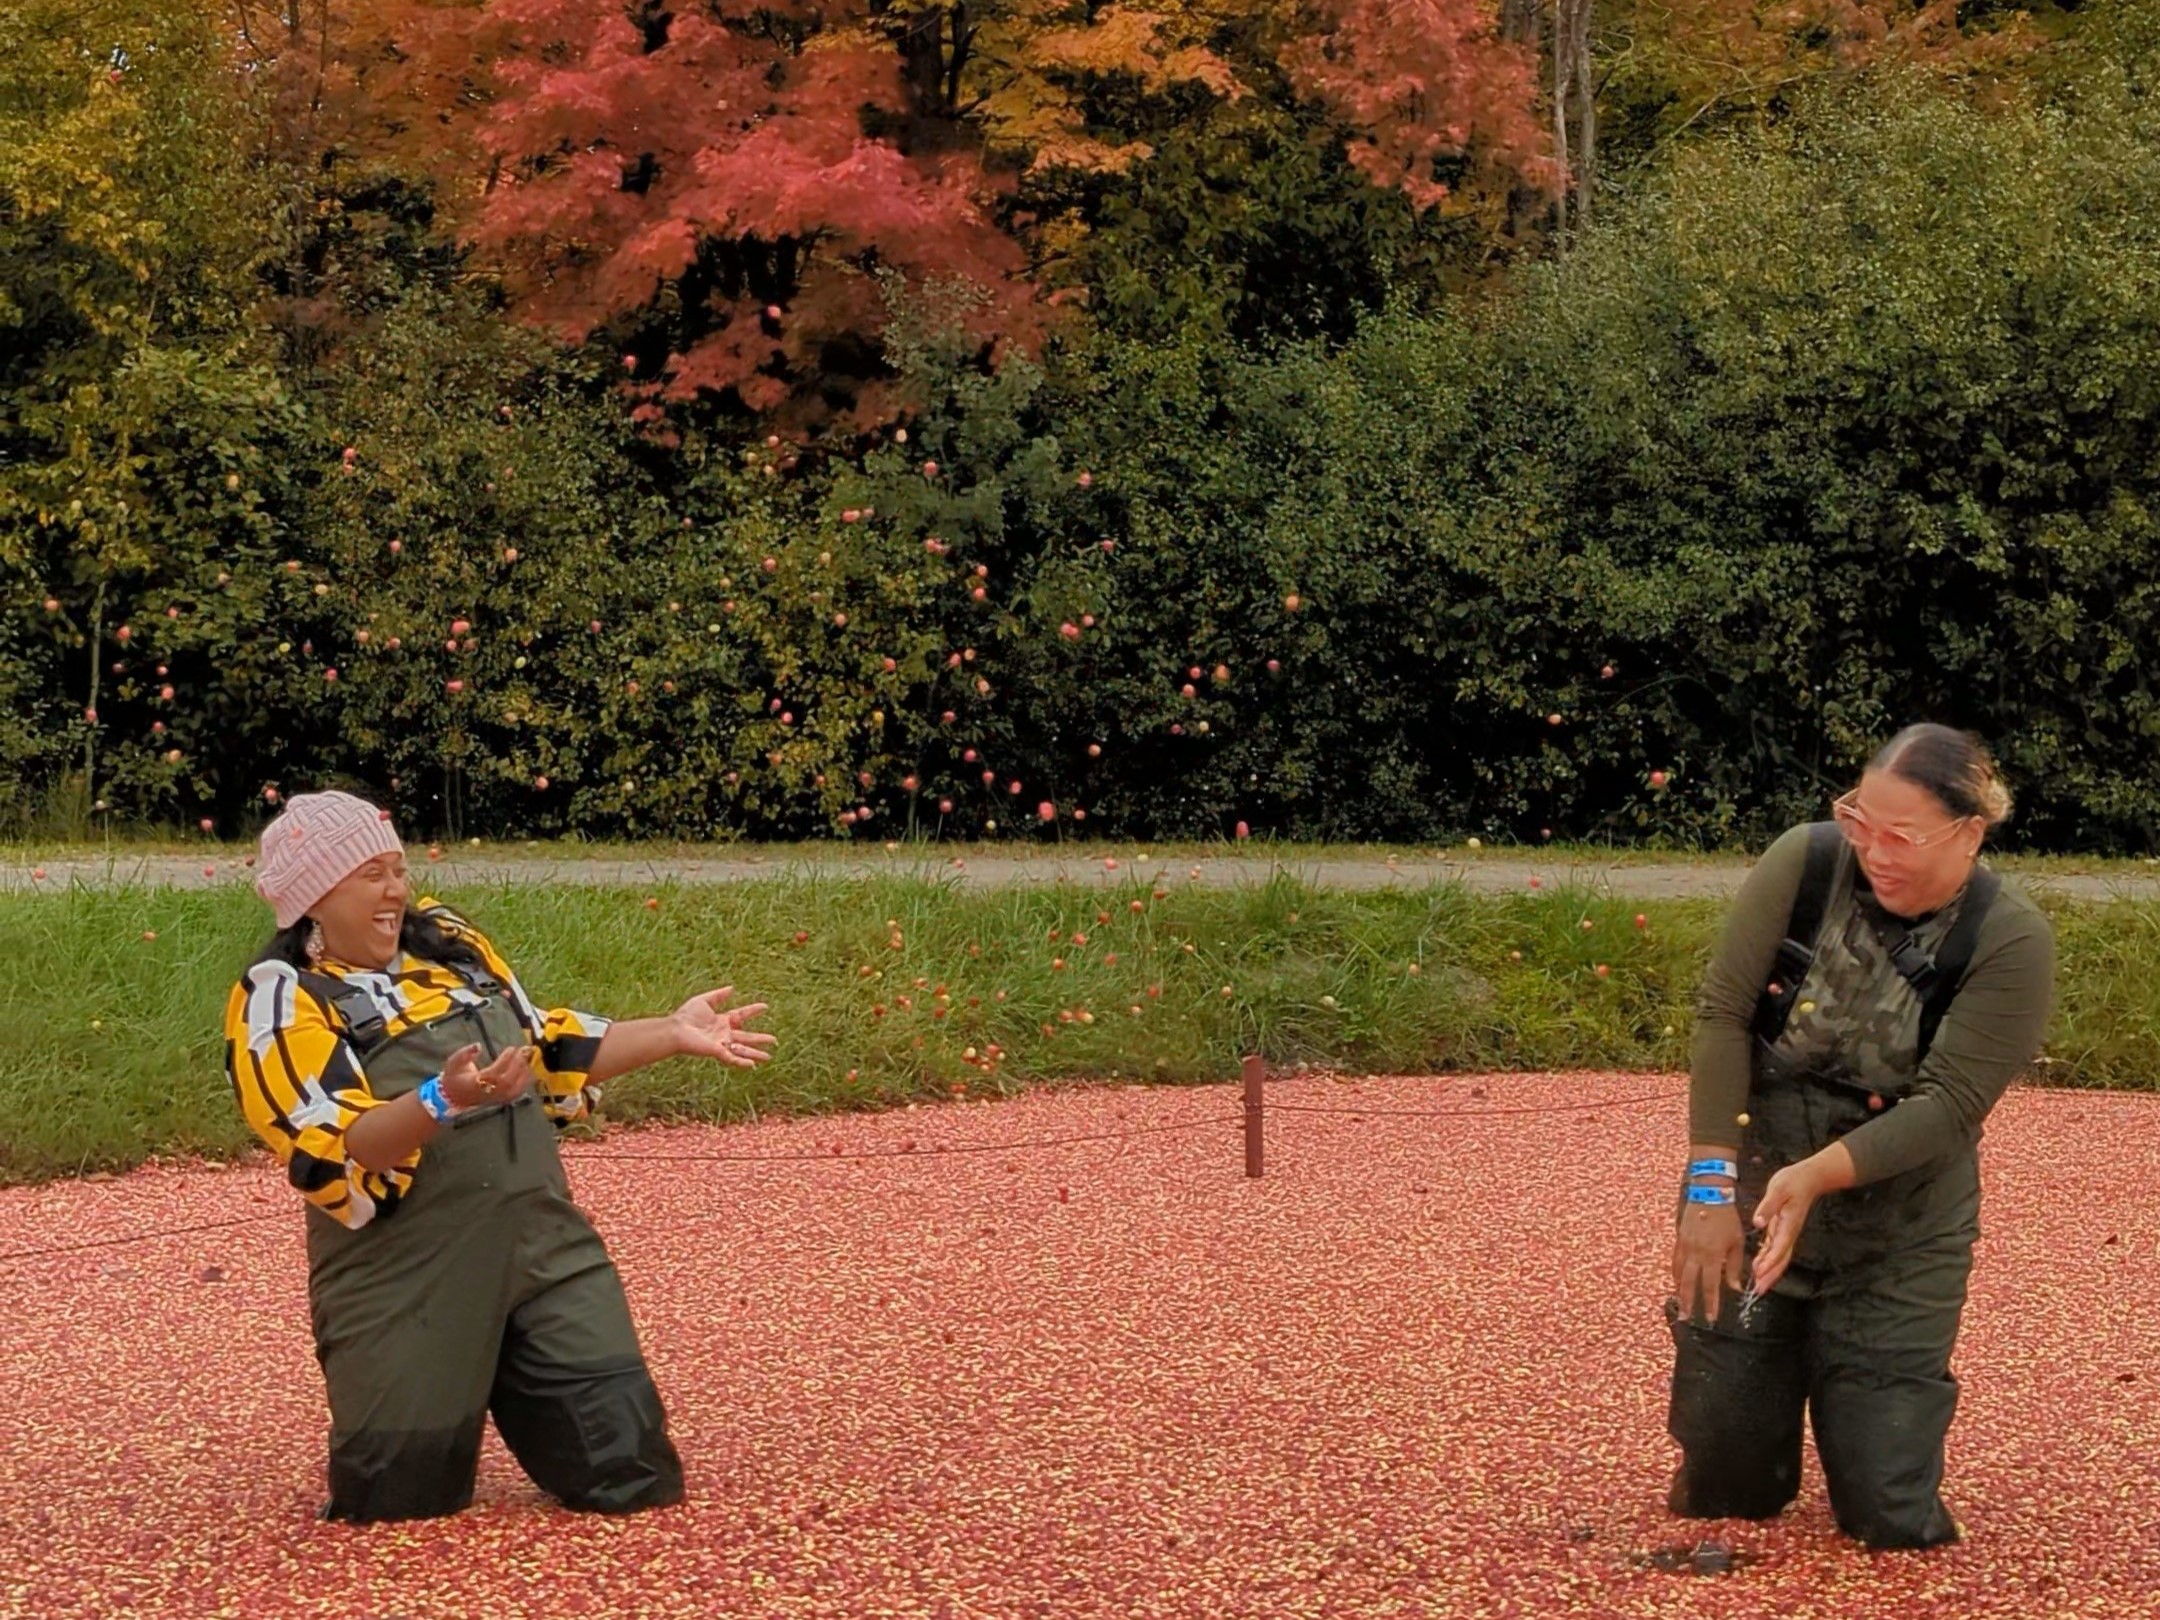 Yashy and friend throwing cranberries